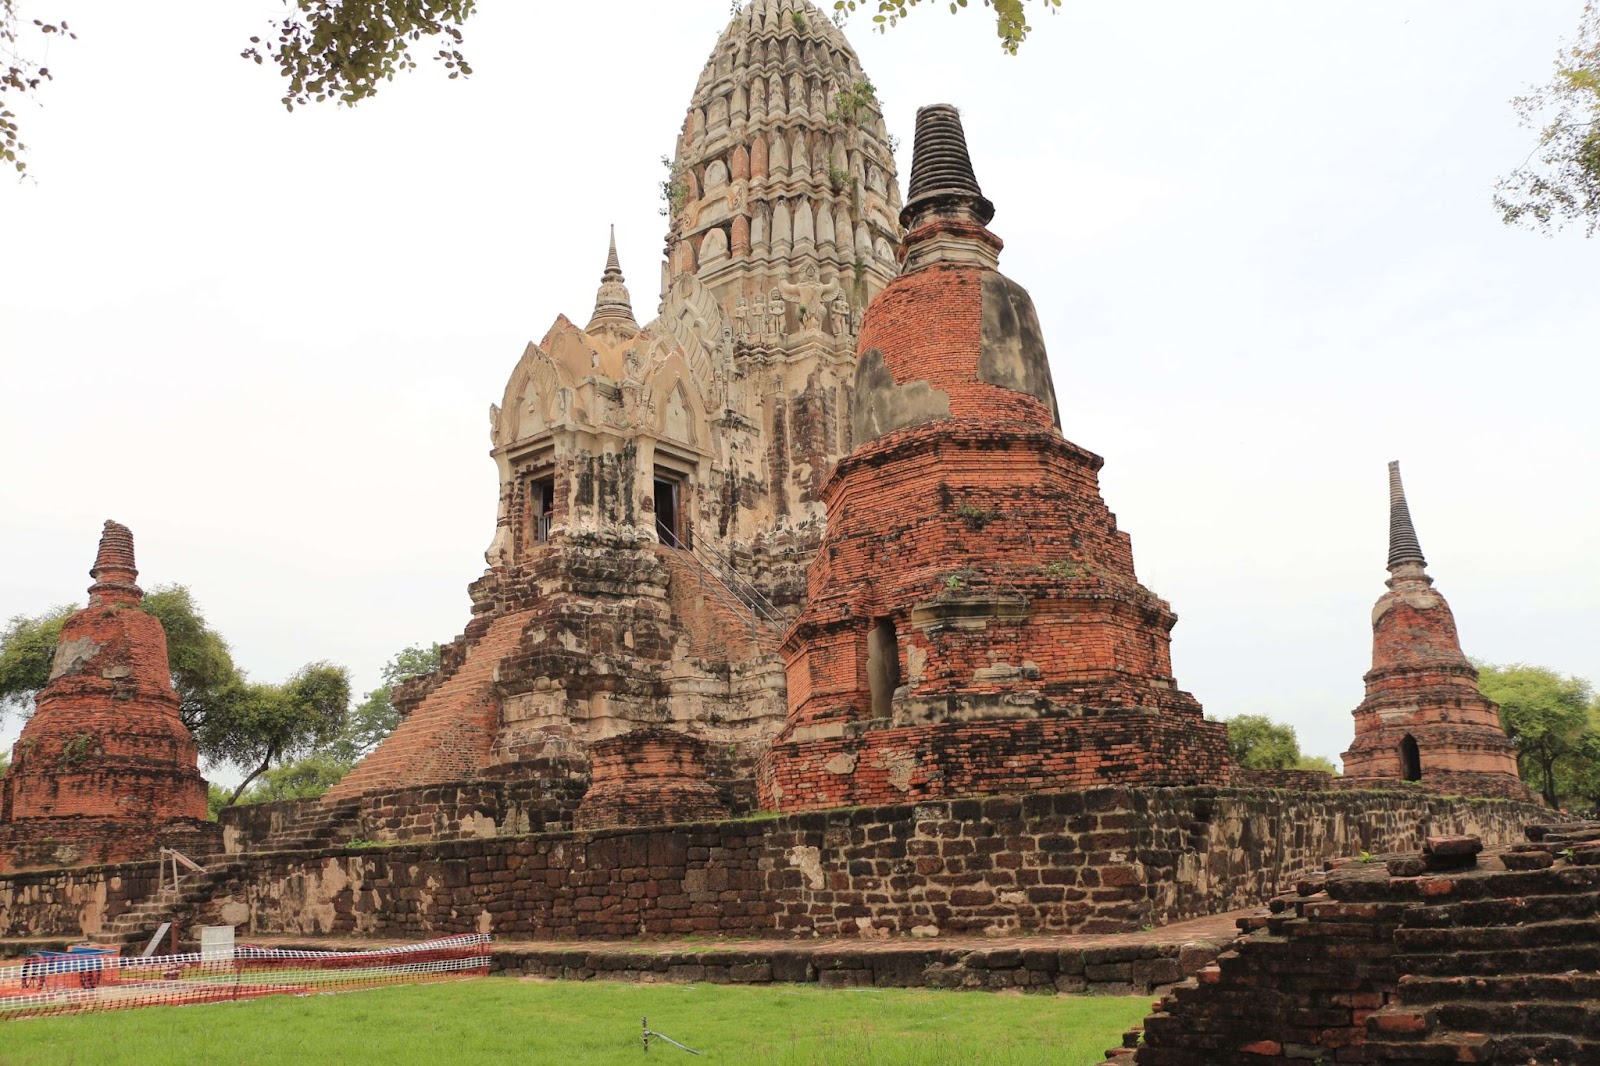 24 hours in Bangkok. This is Wat Rachaburana which is within Ayutthaya Historical Park